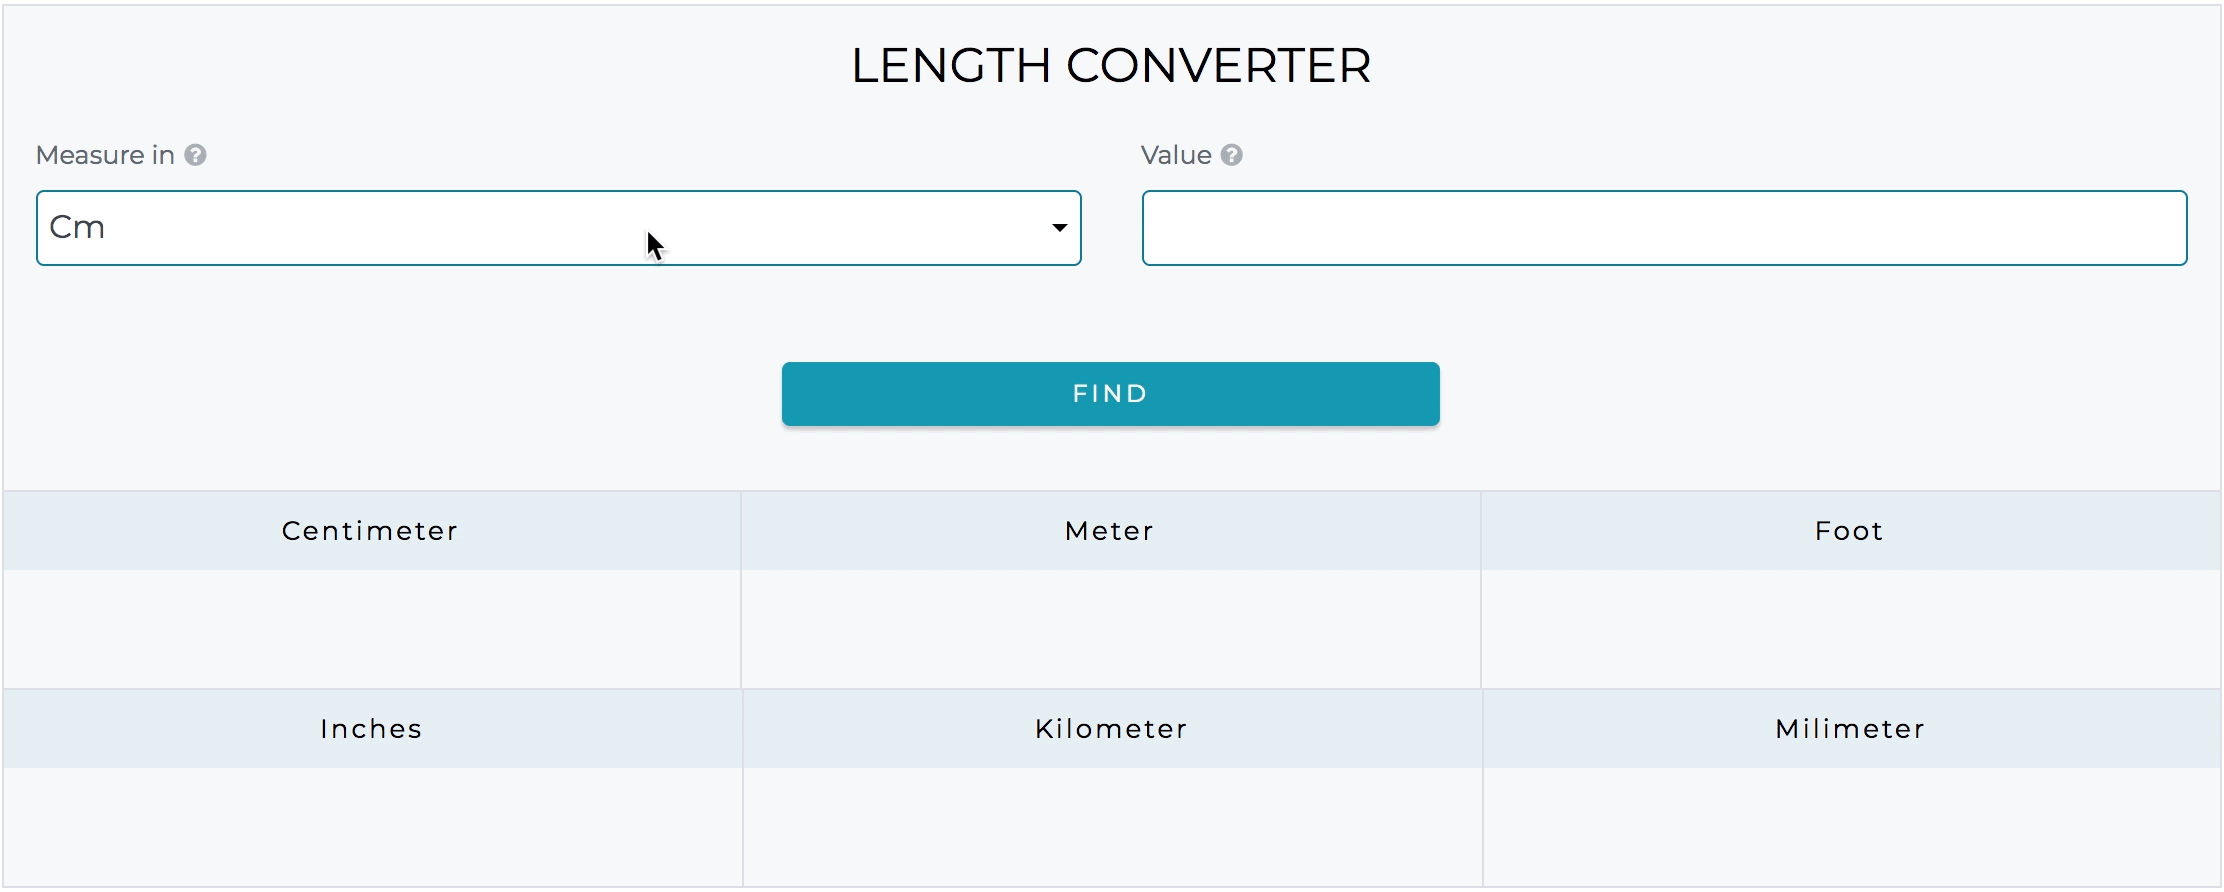 How to use length converter